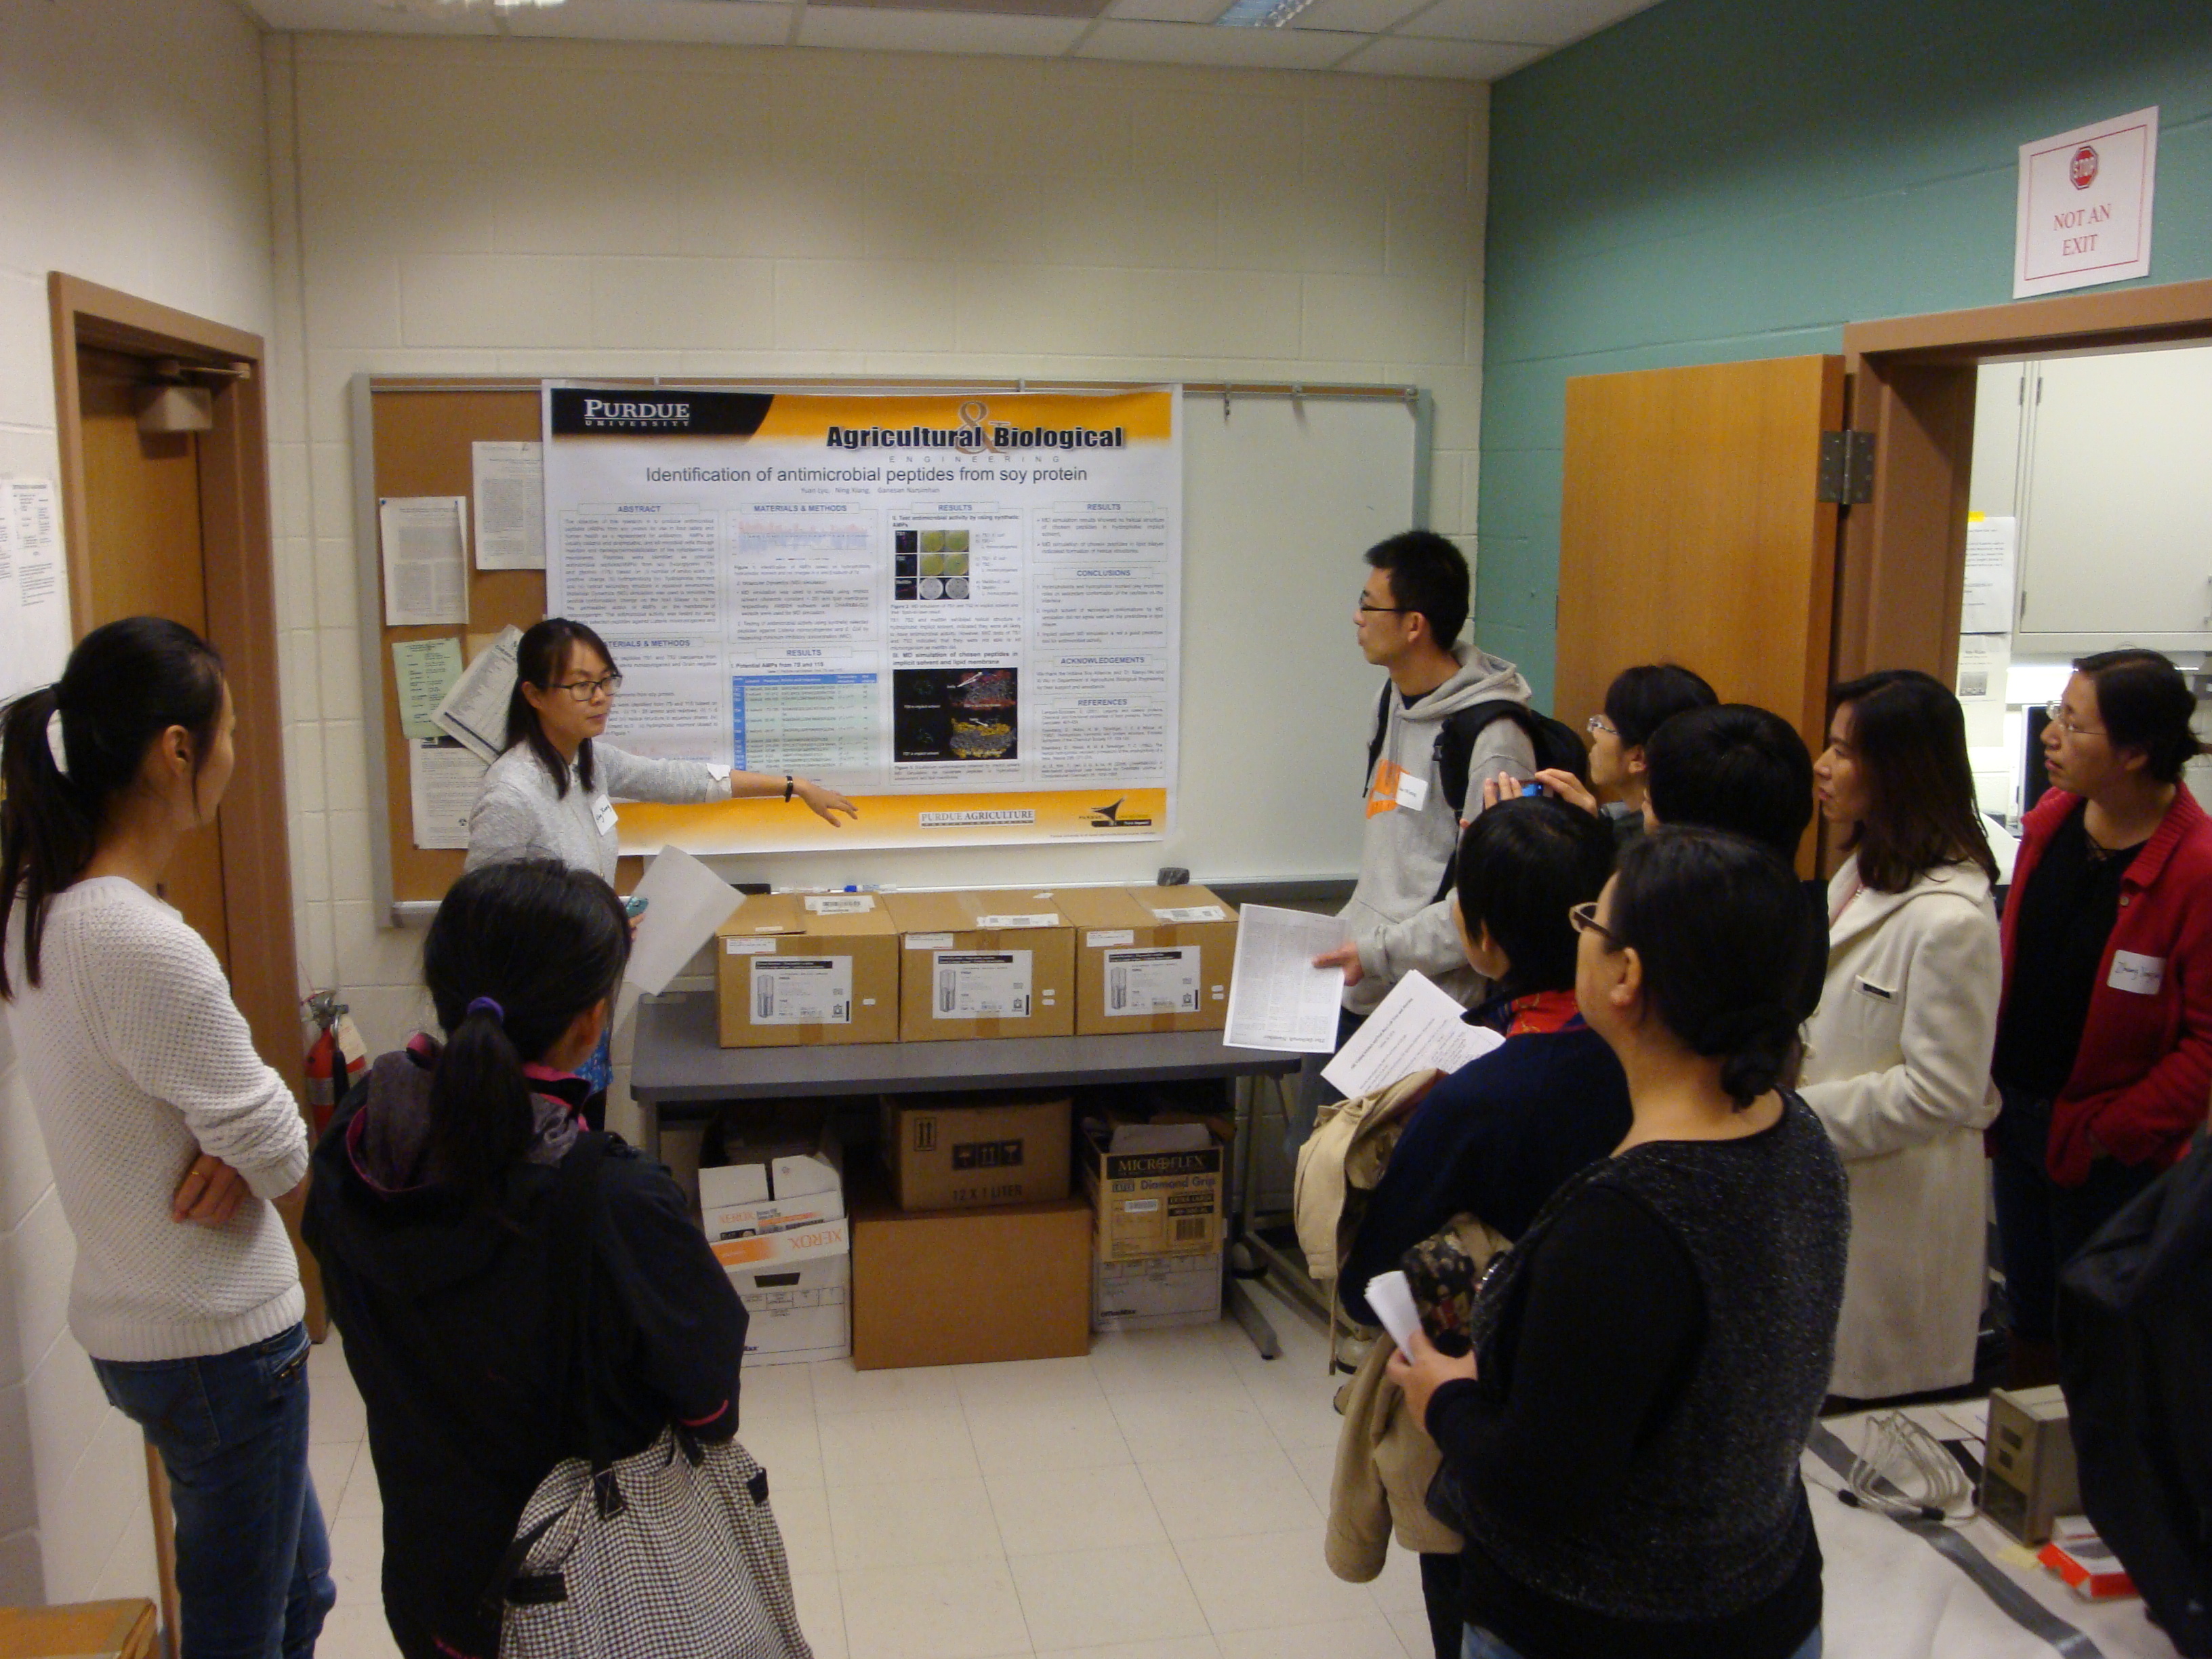 Graduate students Yuan Lyu and Ning Xiang guided the tour in Dr. Narsimhans lab